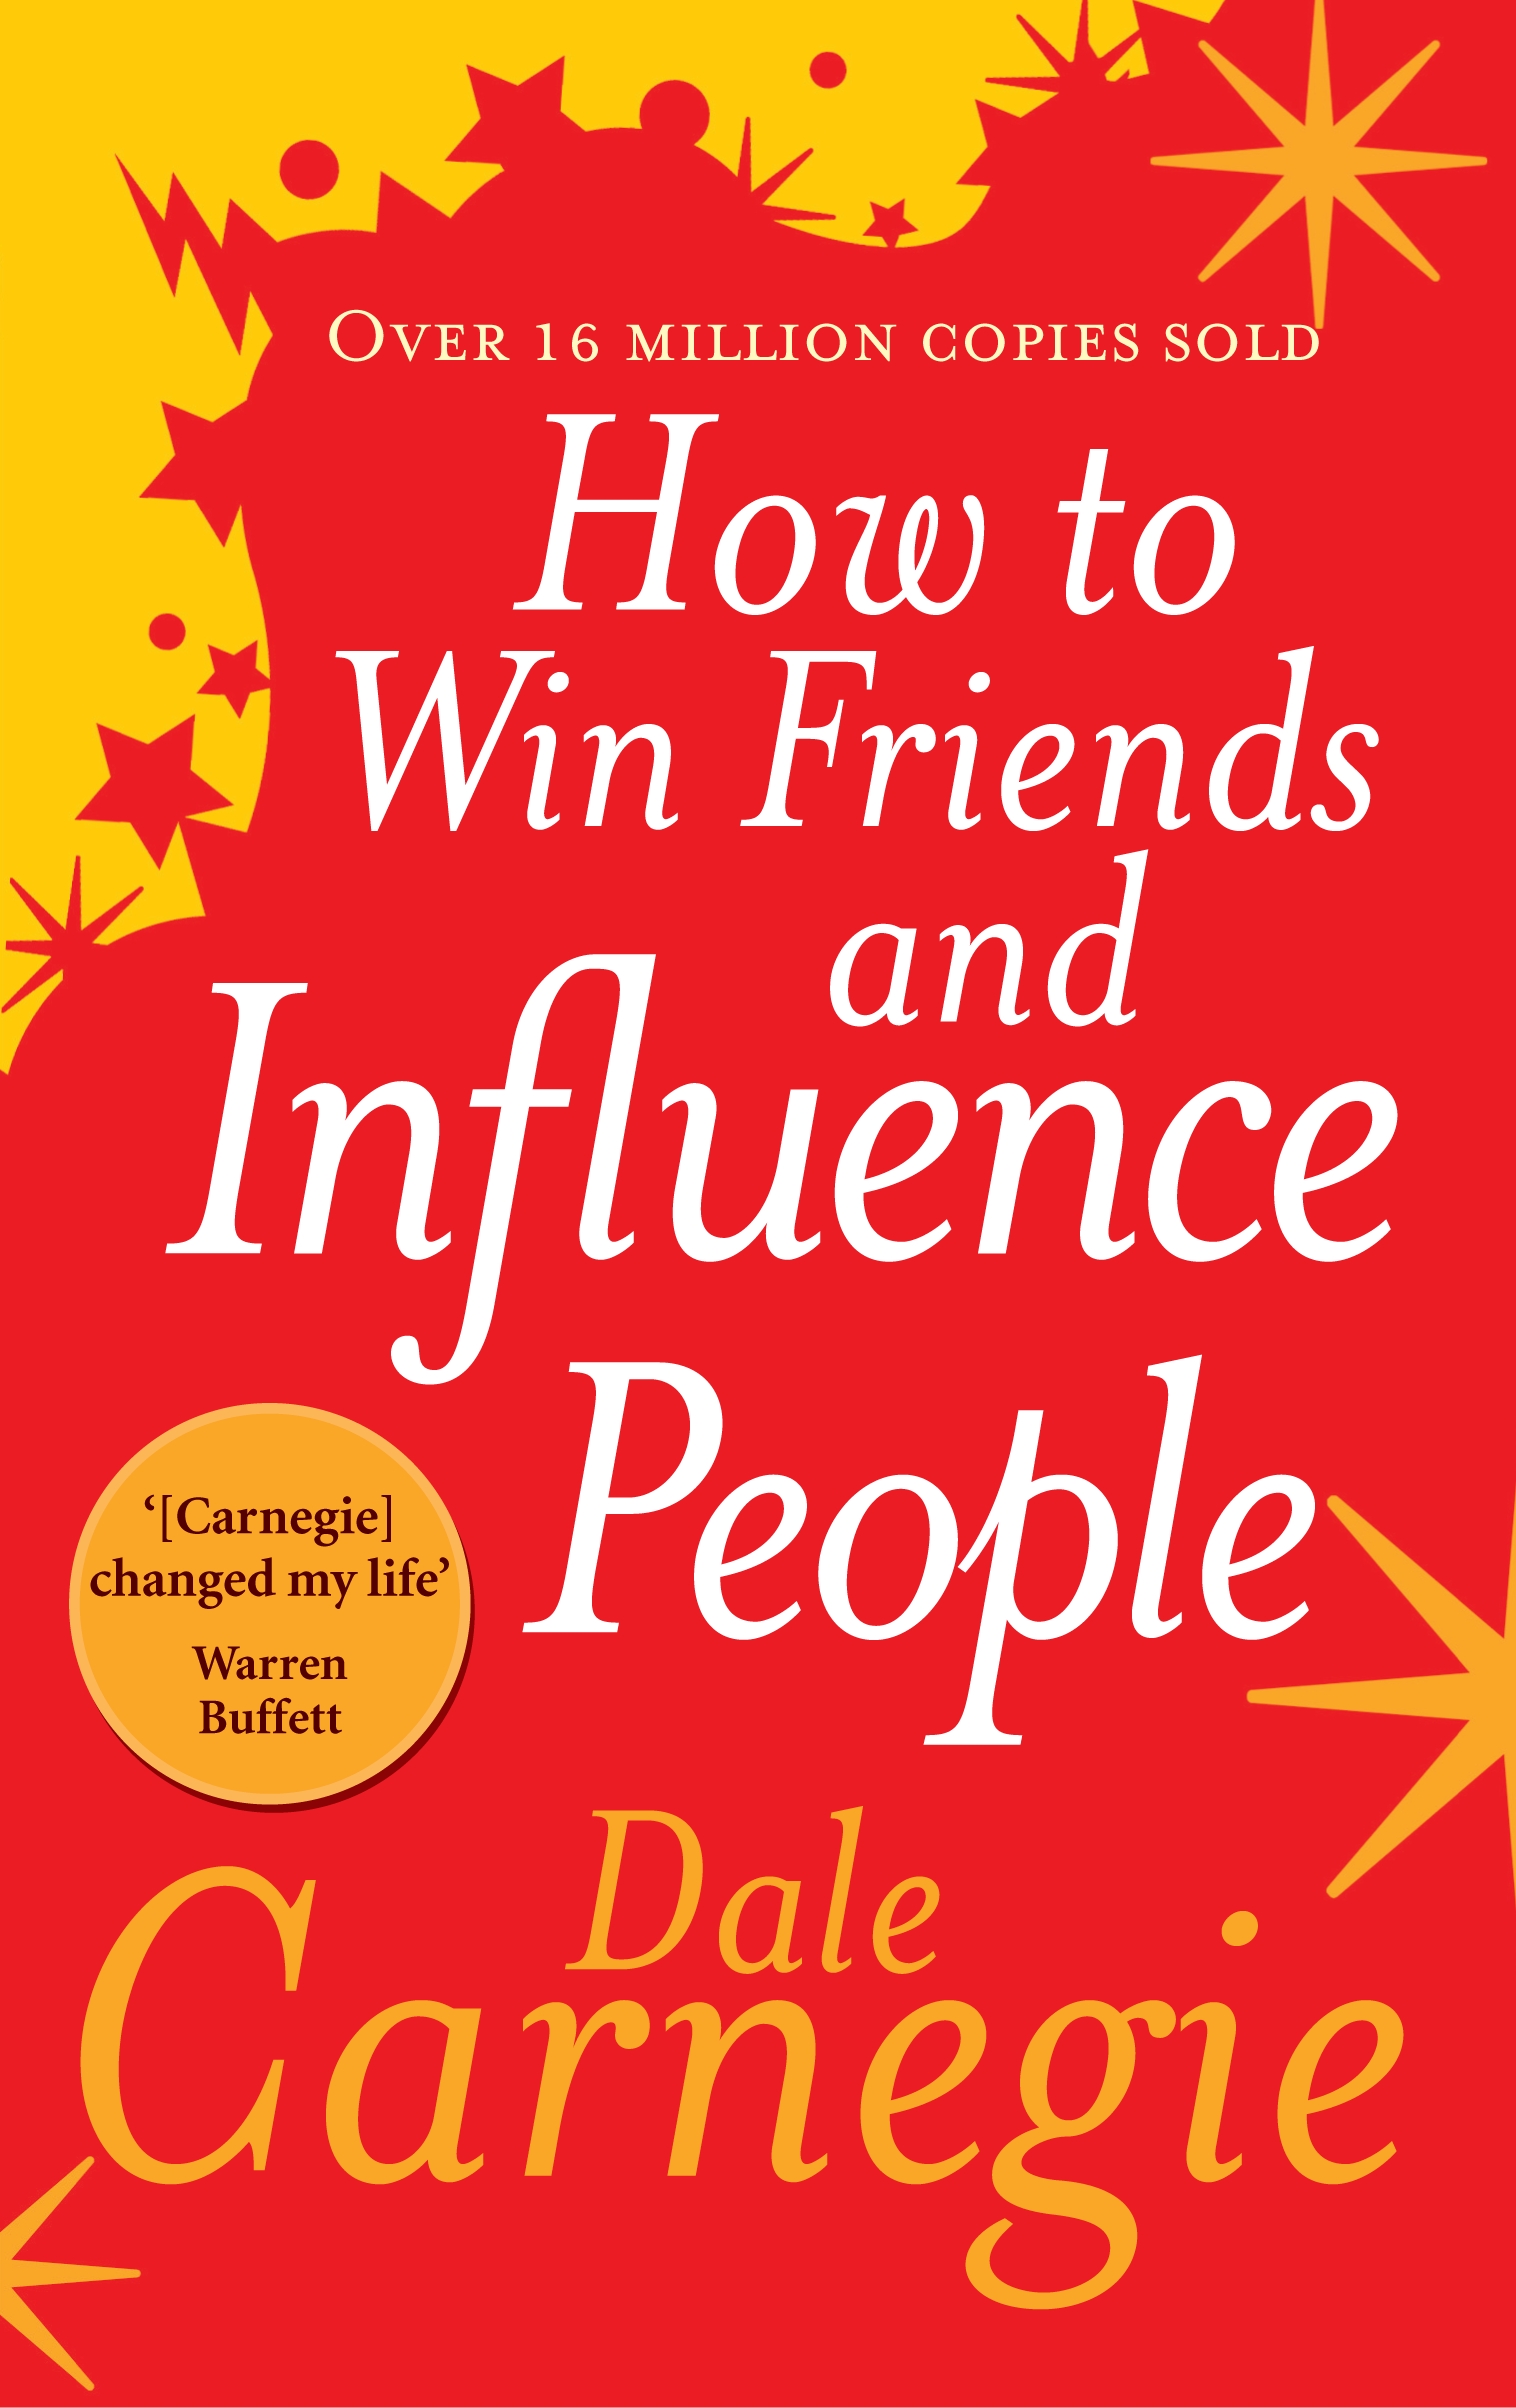 How to Win Friends and Influence People instal the new